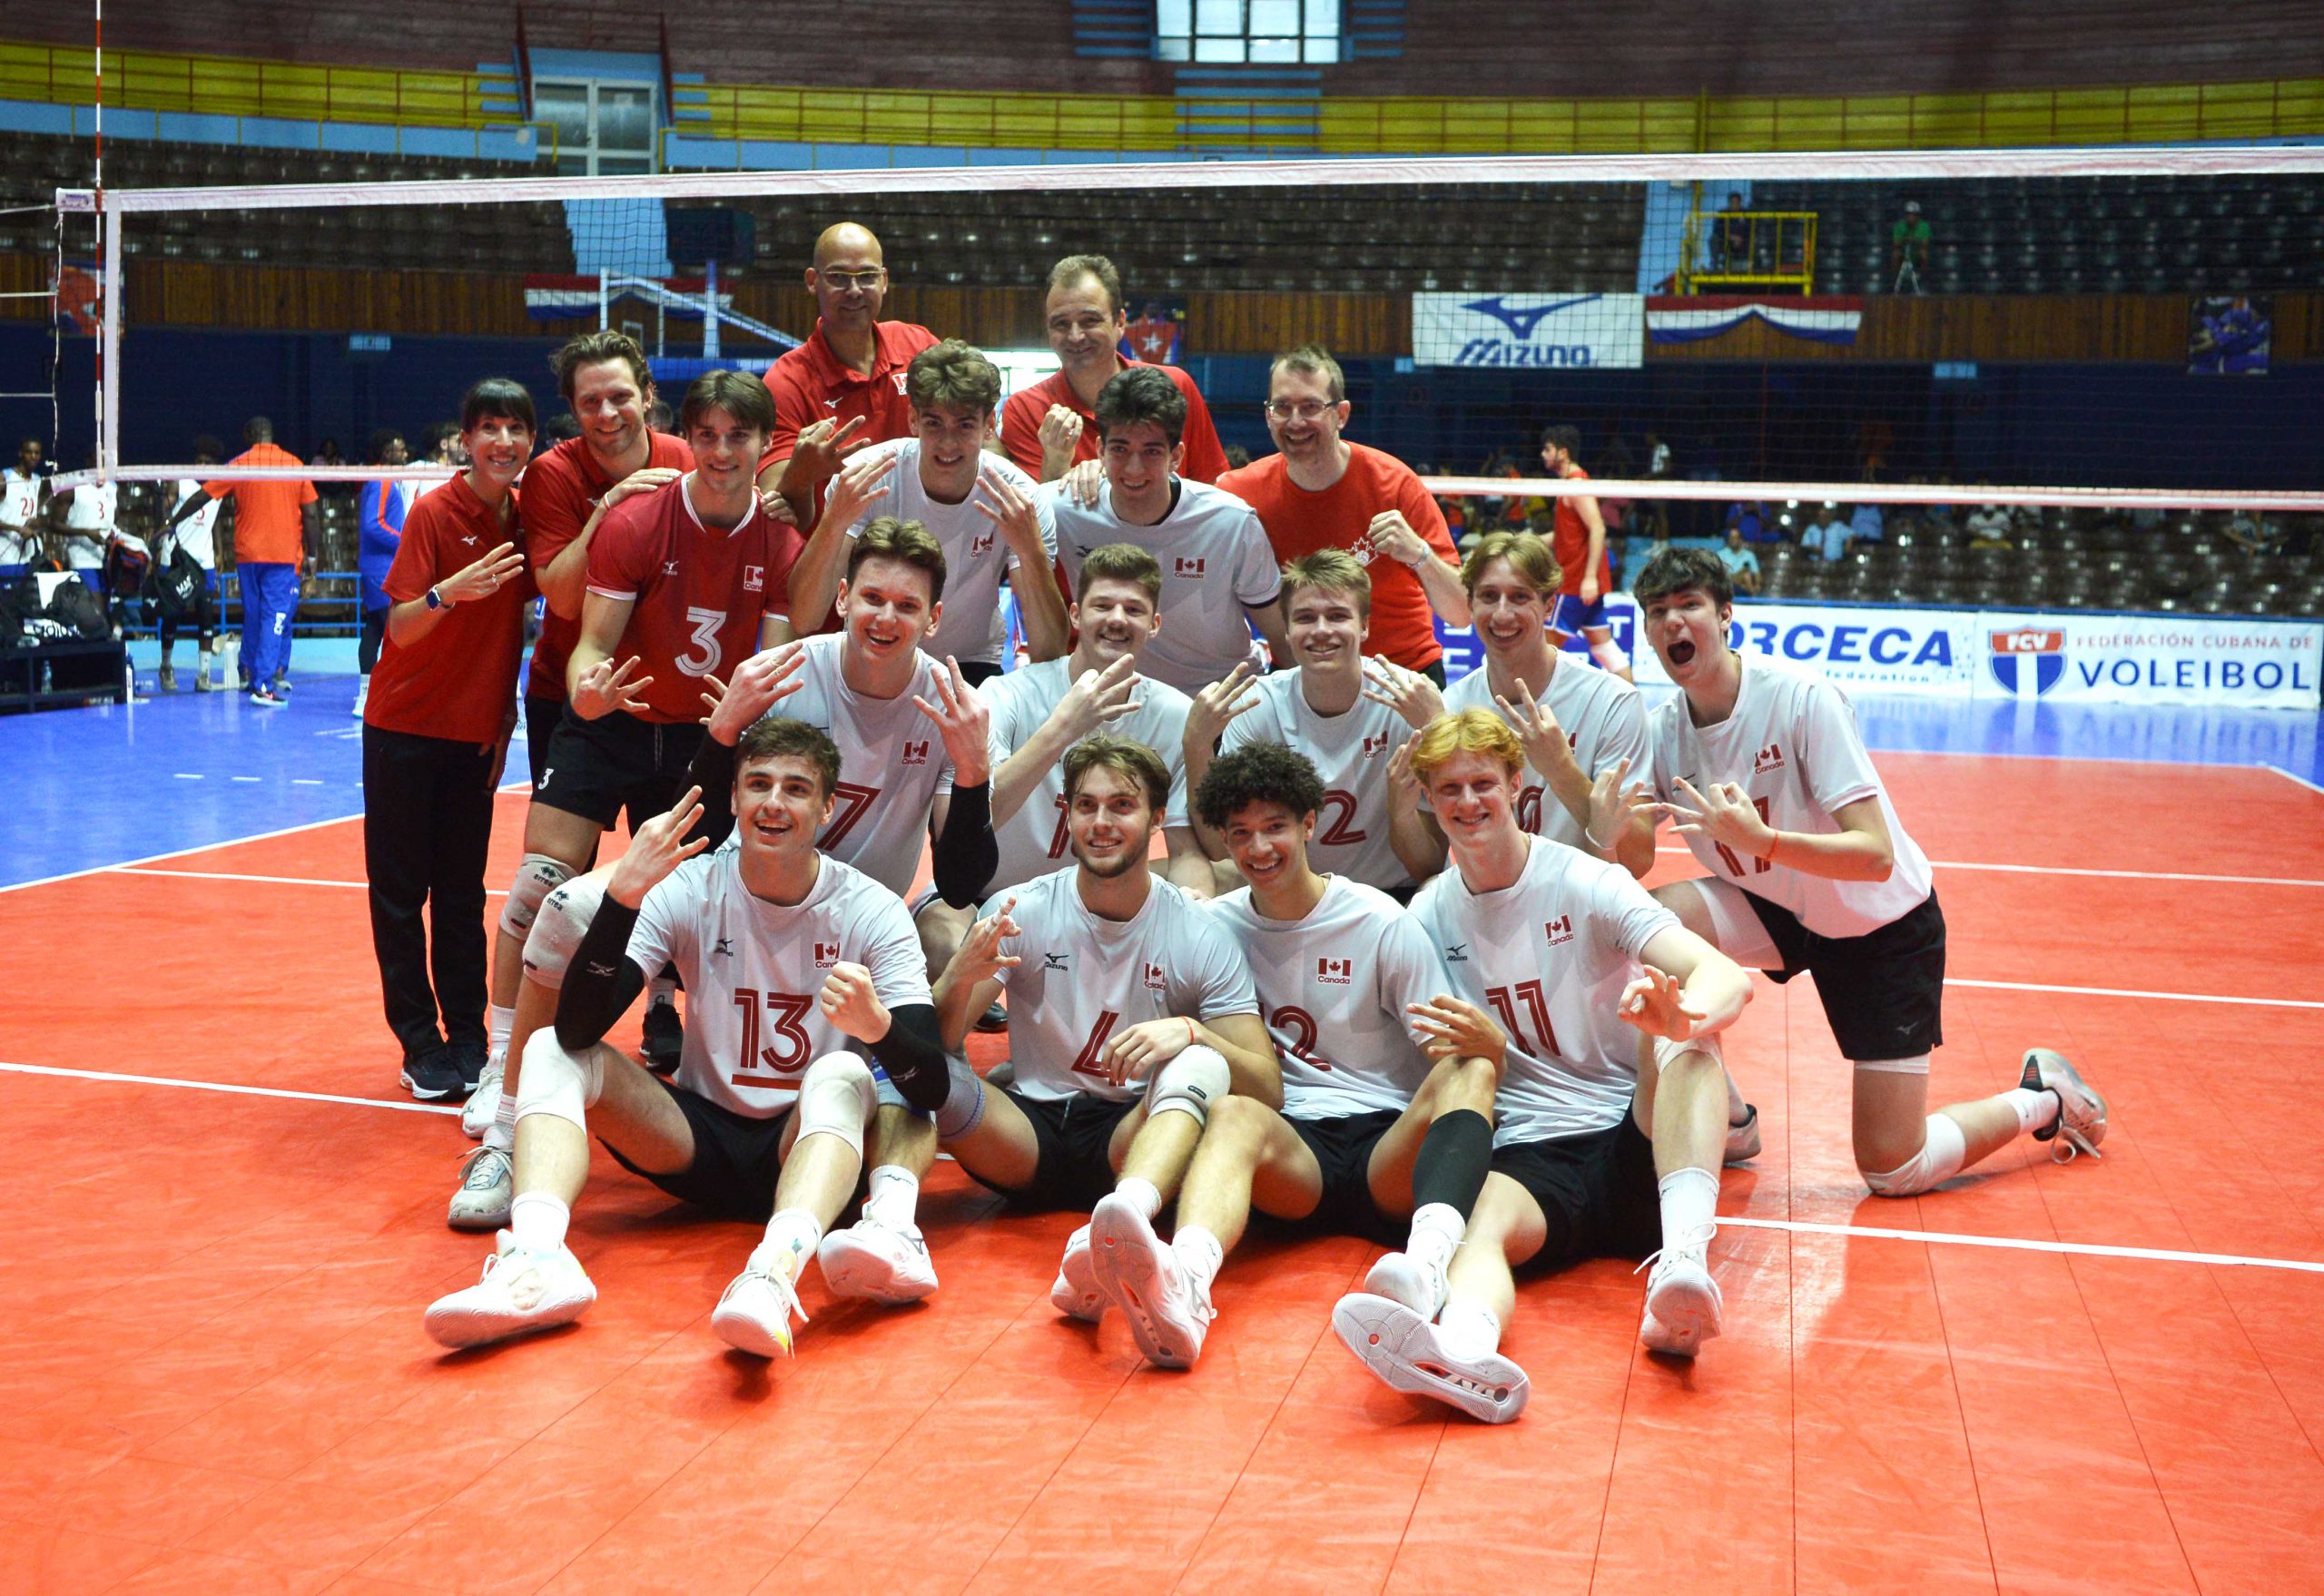 Canada beat Puerto Rico to repeat the bronze medal at the U21 Pan American Cup